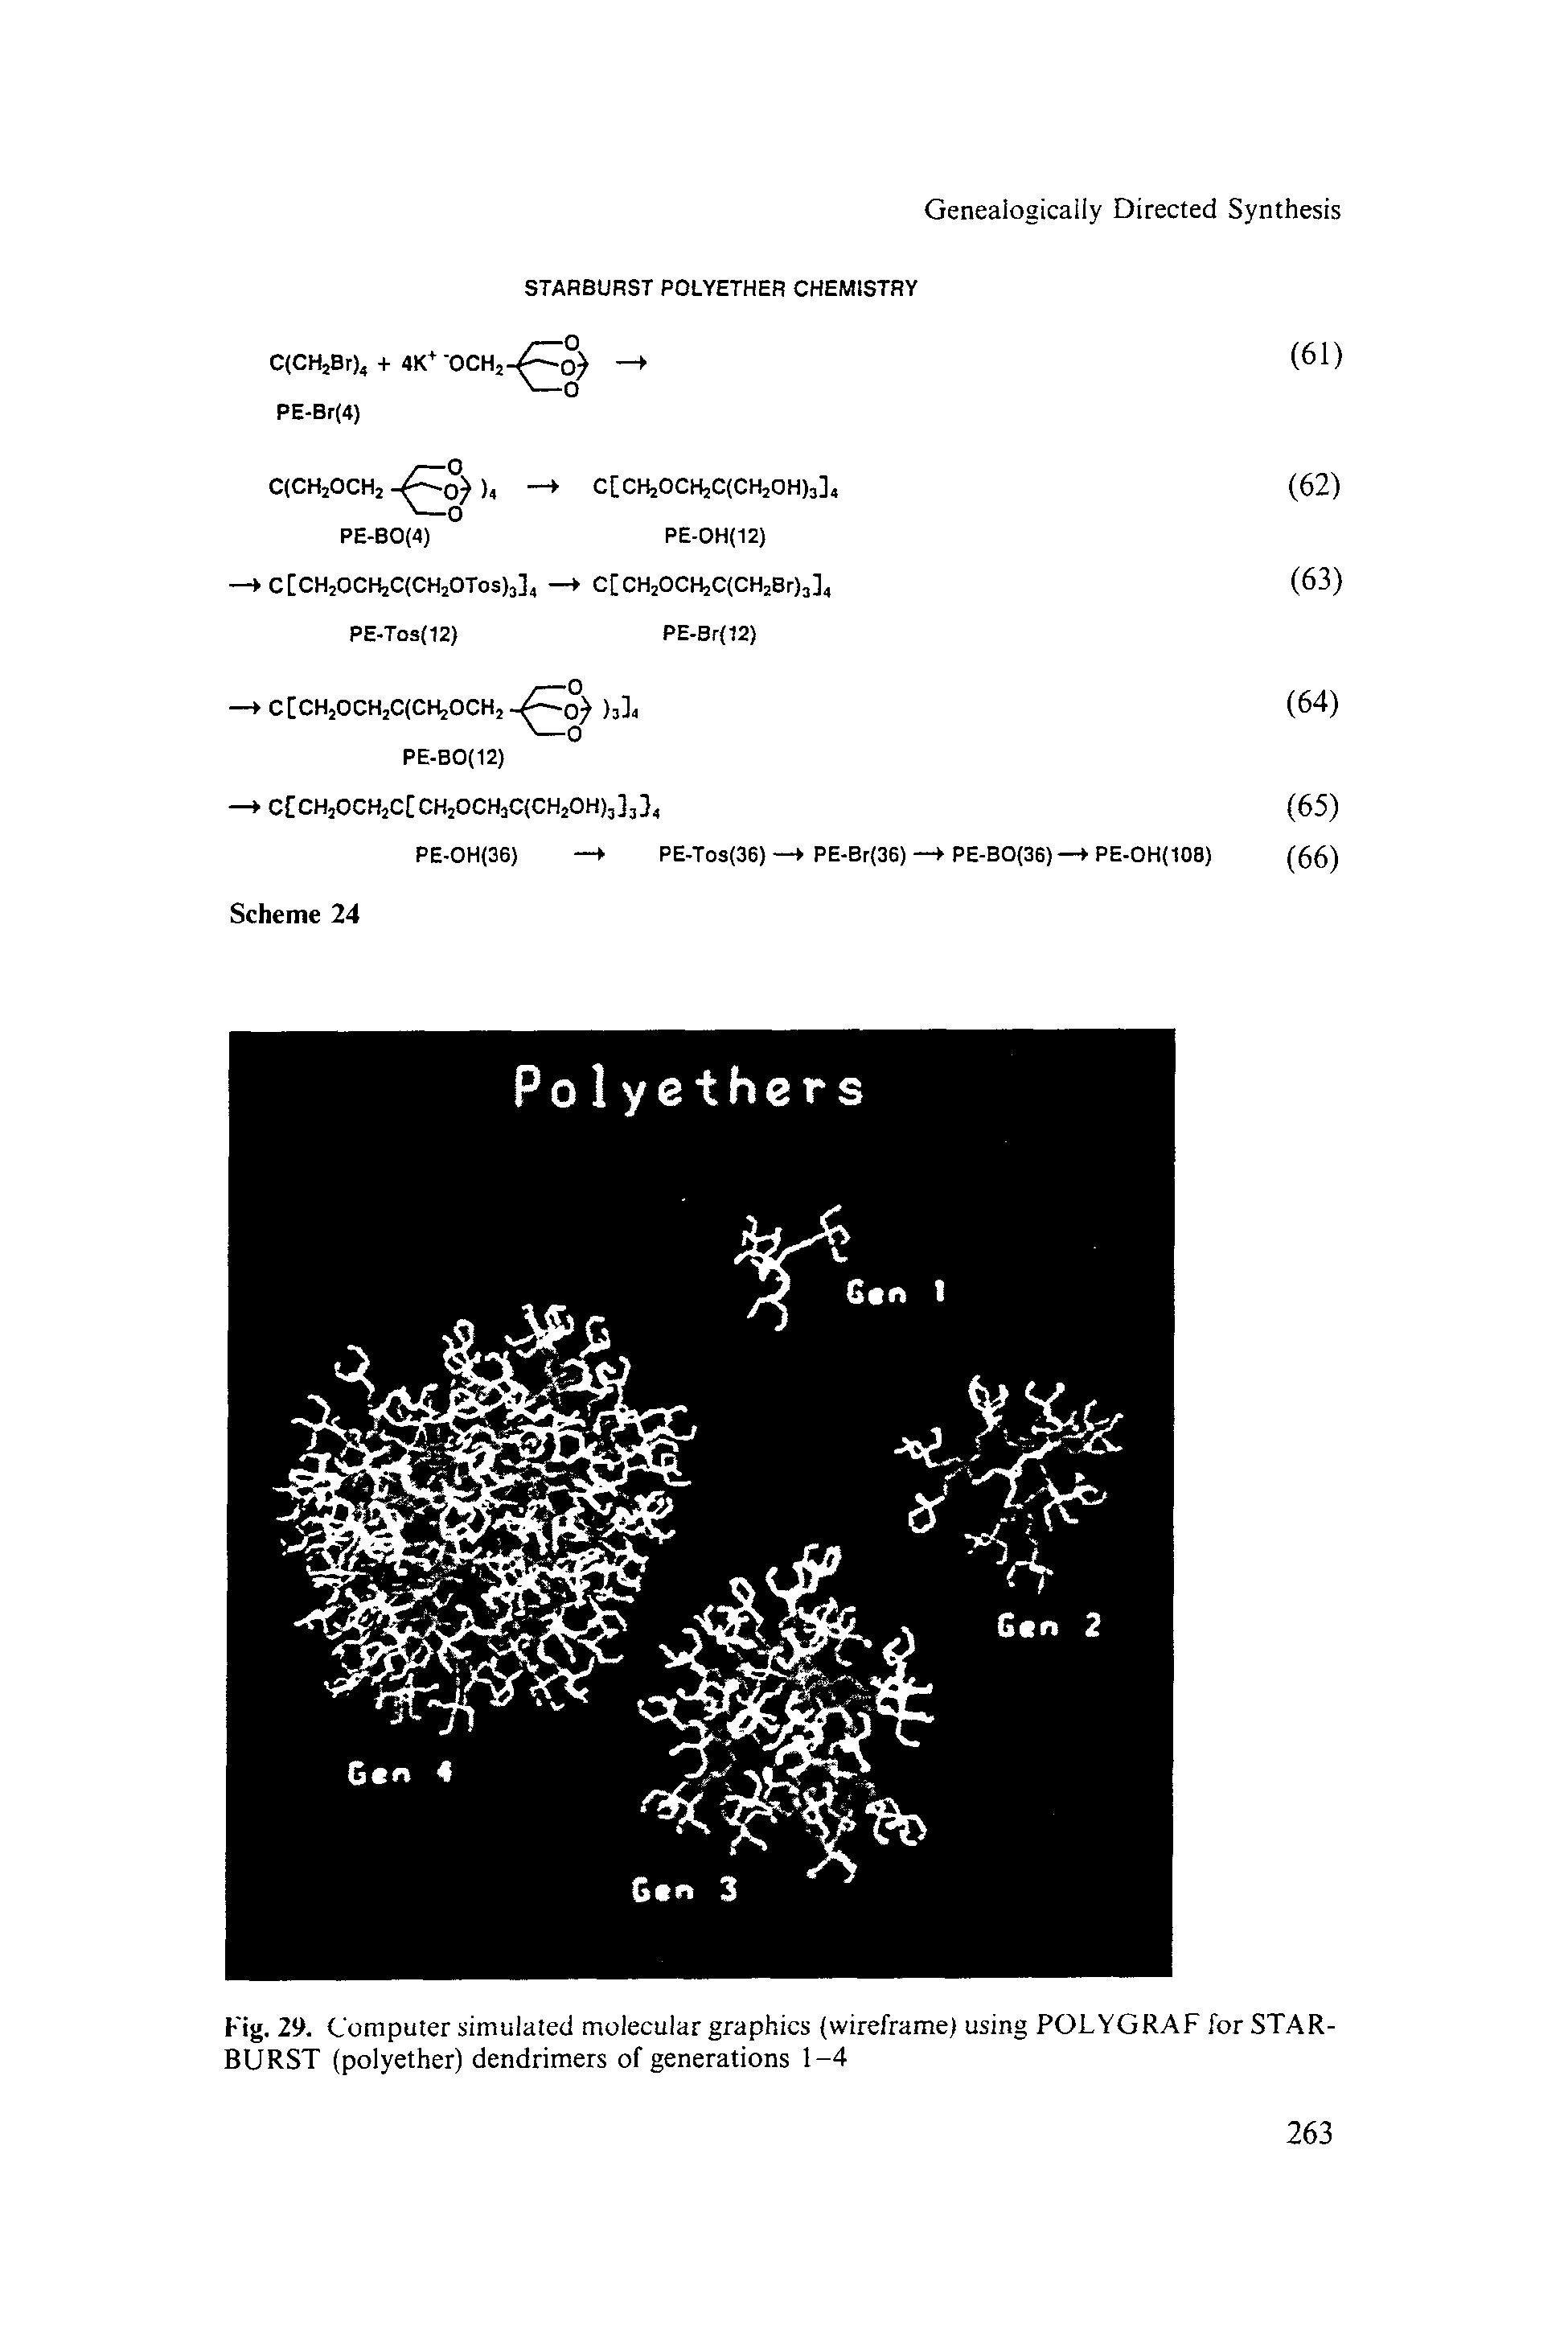 Fig. 29. Computer simulated molecular graphics (wireframe) using POLYGRAF for STAR-BURST (polyether) dendrimers of generations 1-4...